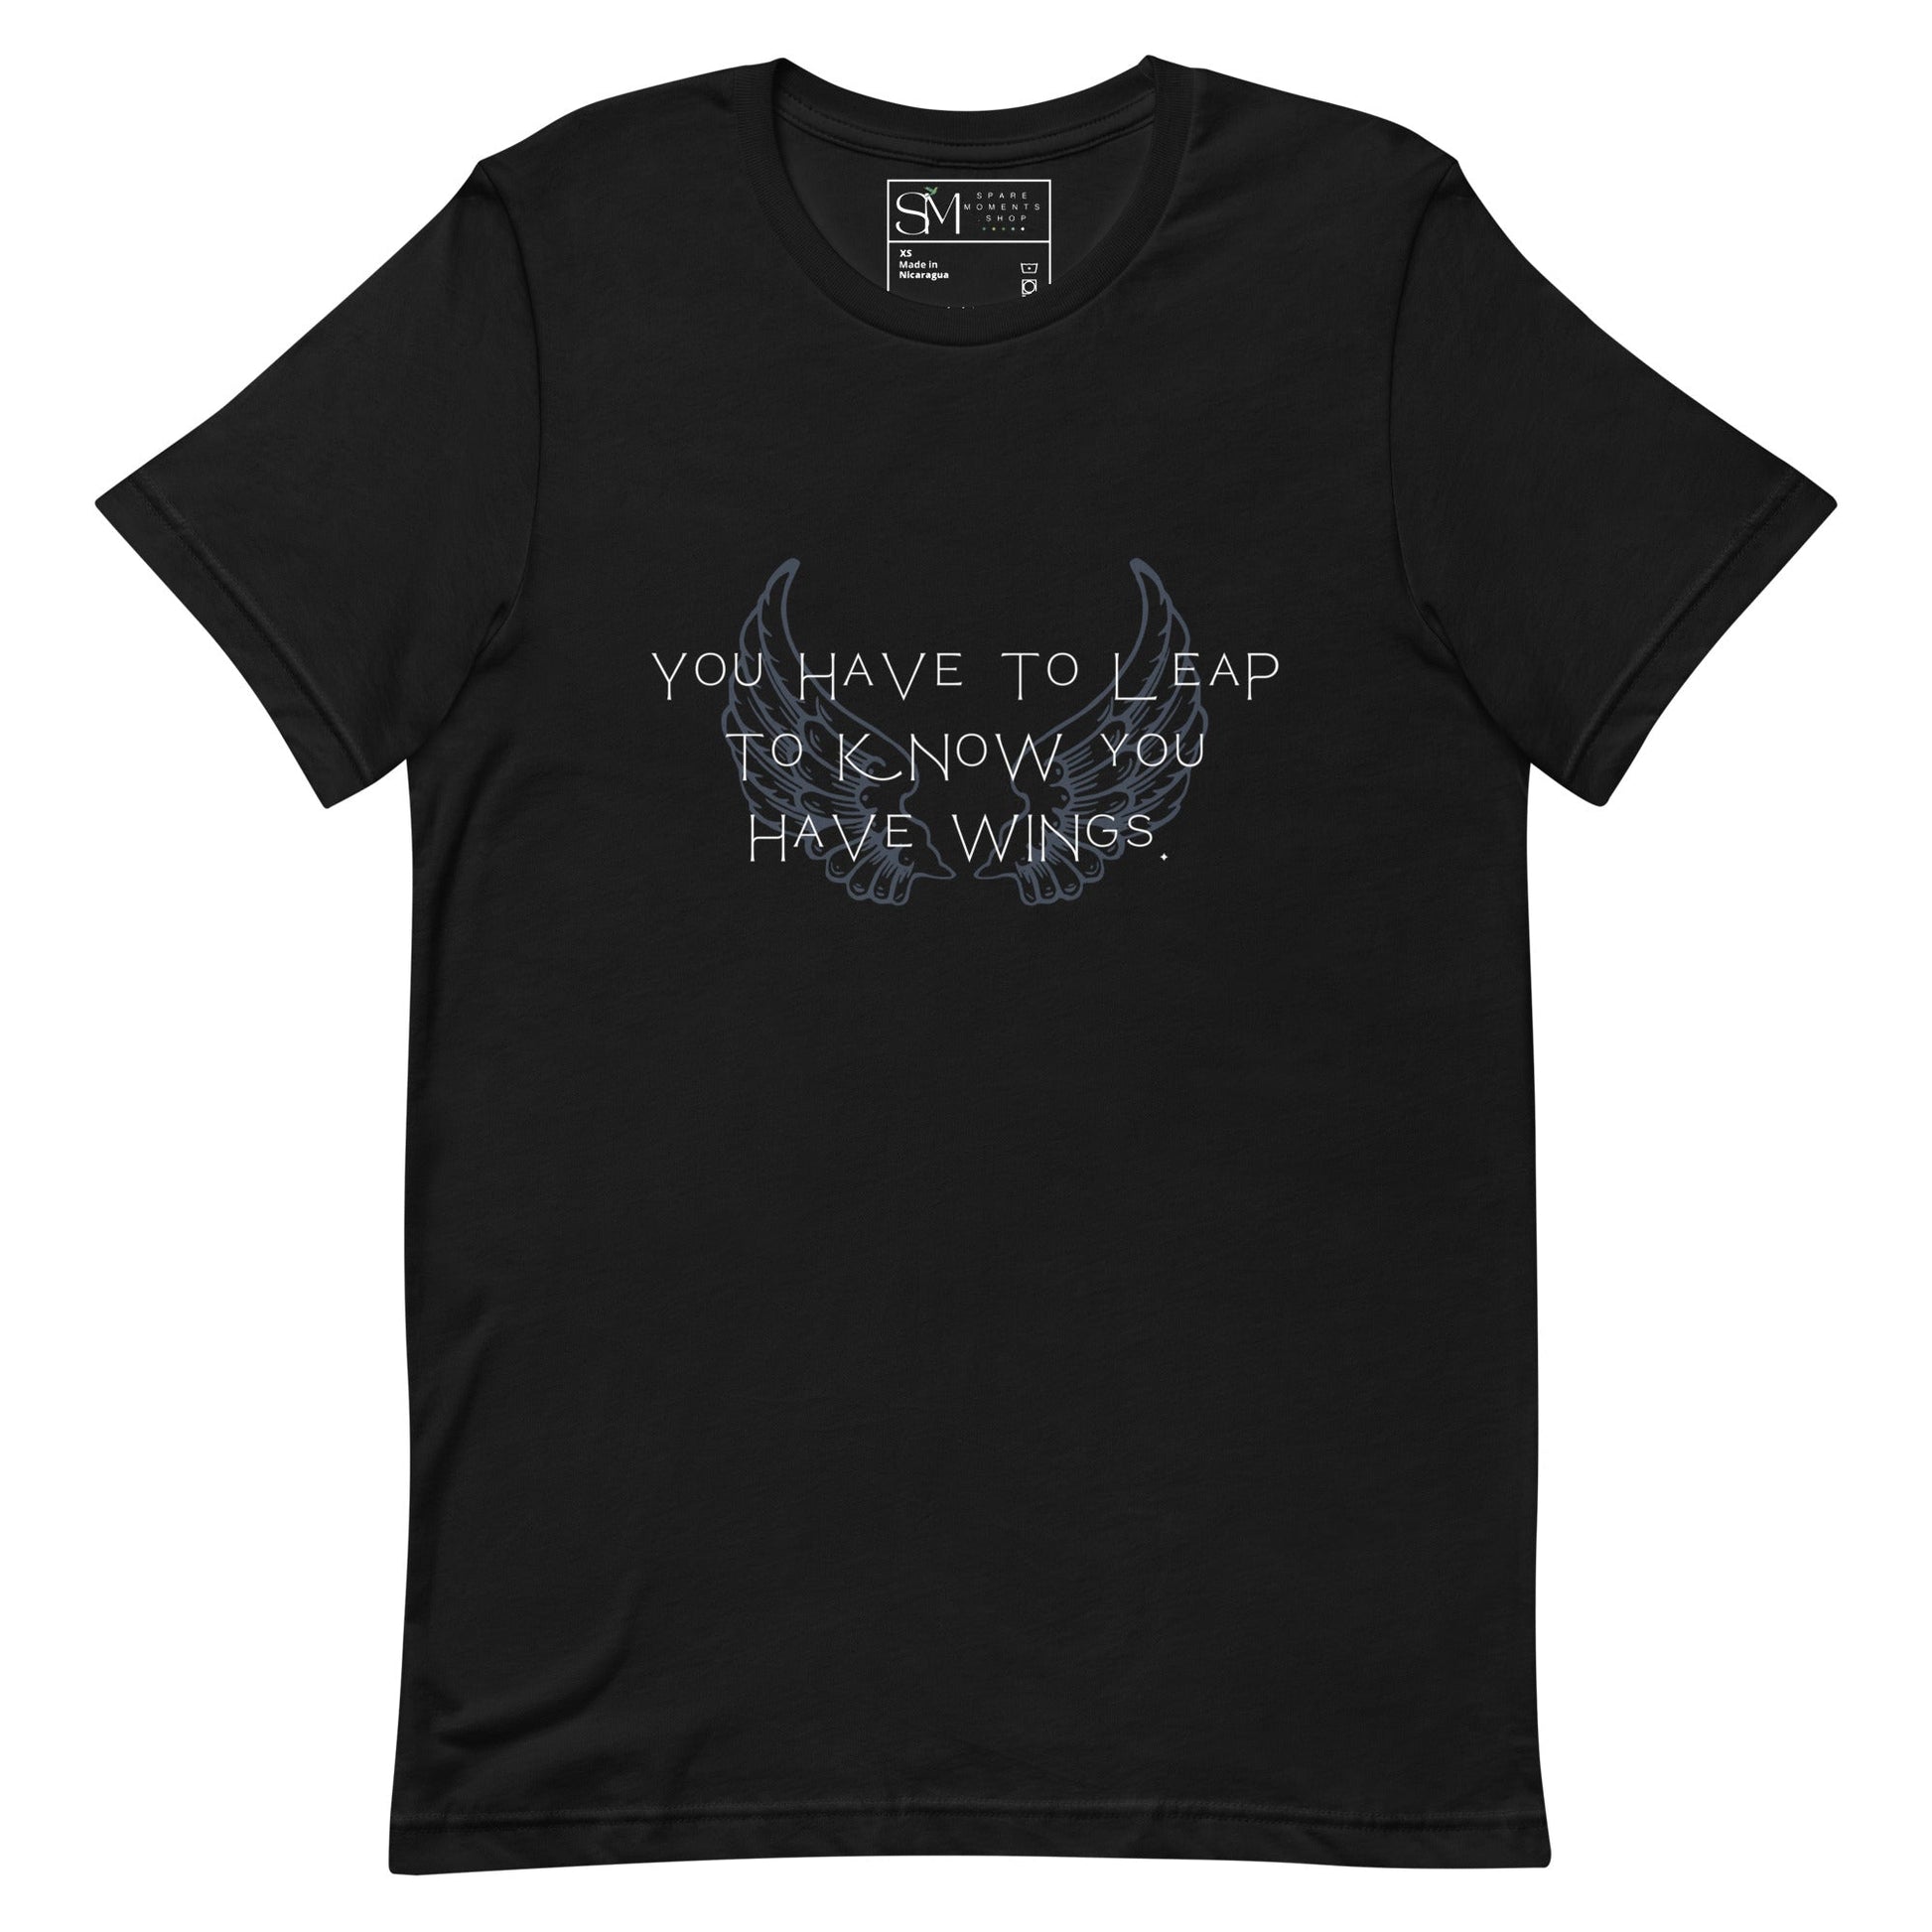 Leap To Know You Have Wings | Unisex t-shirt